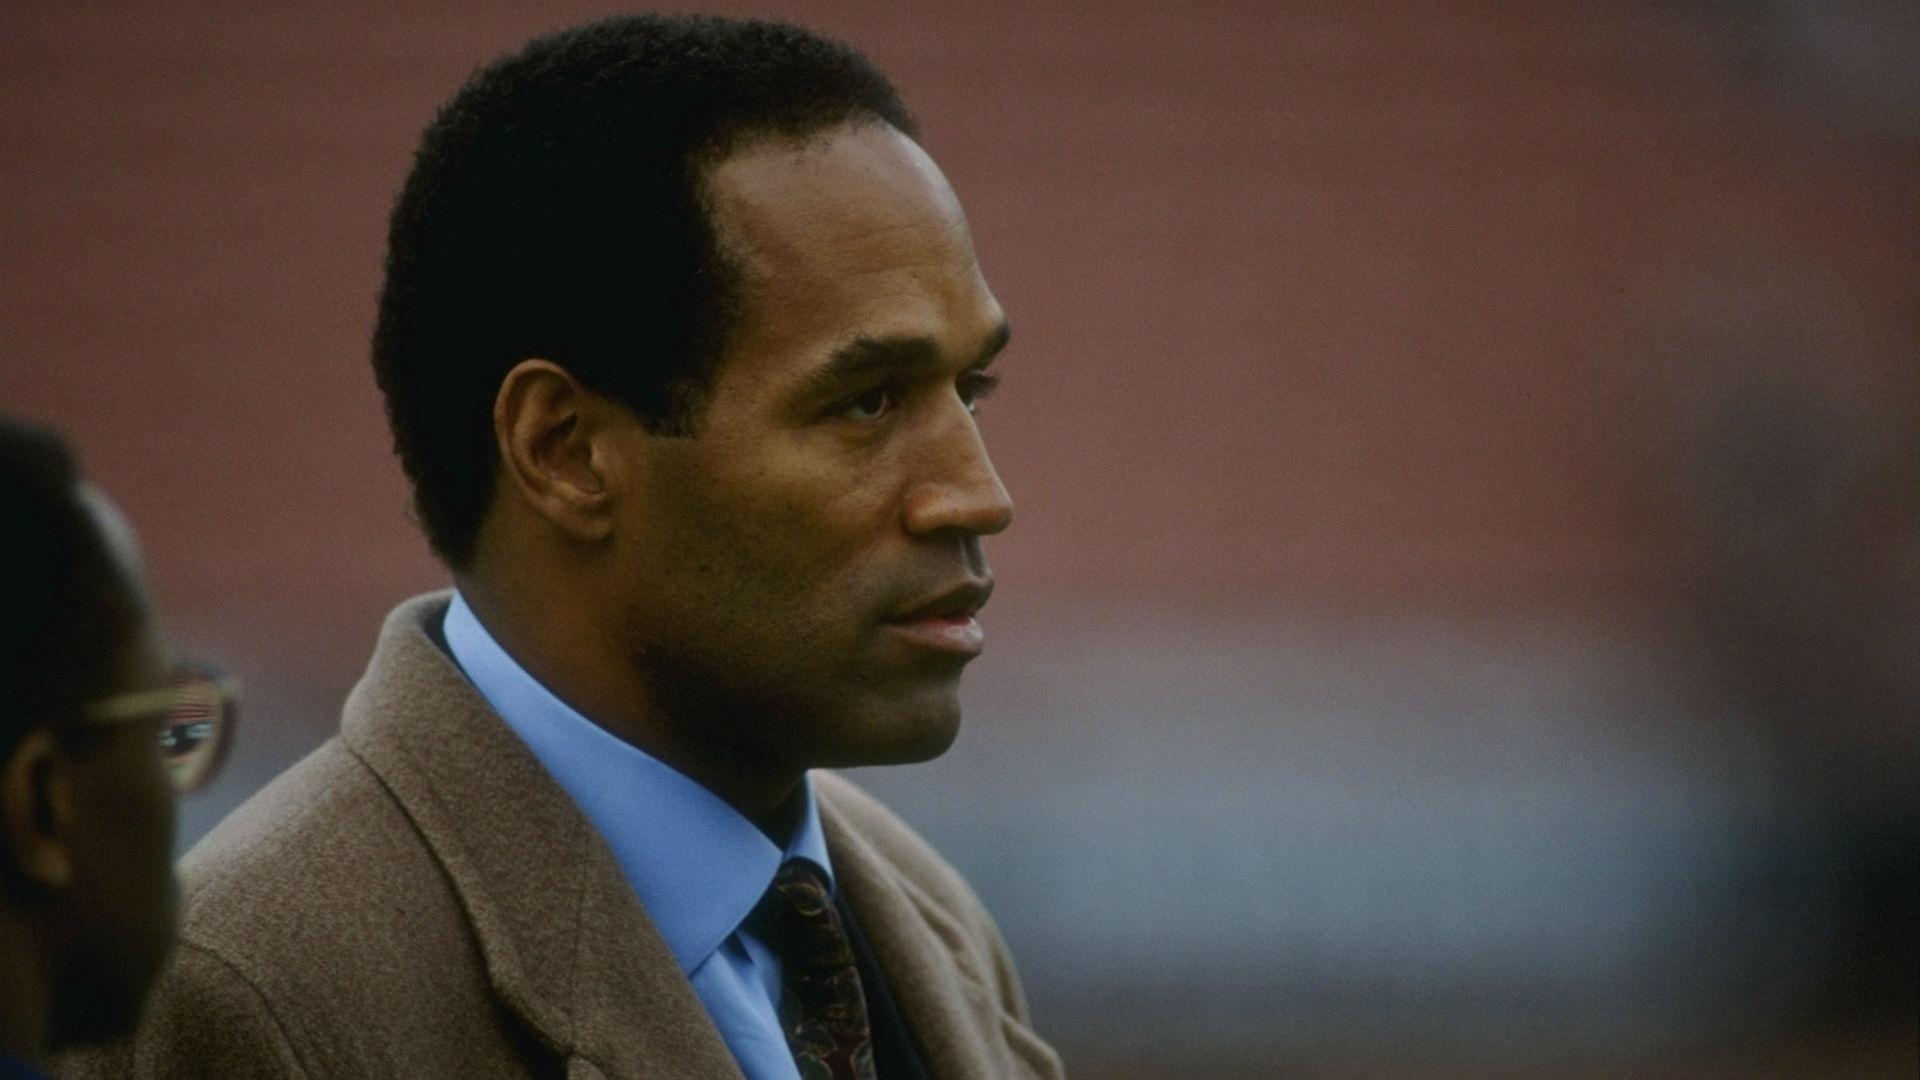 O.J. Simpson Says Bill Cosby Will Be Target In Prison, Calls for House Arrest